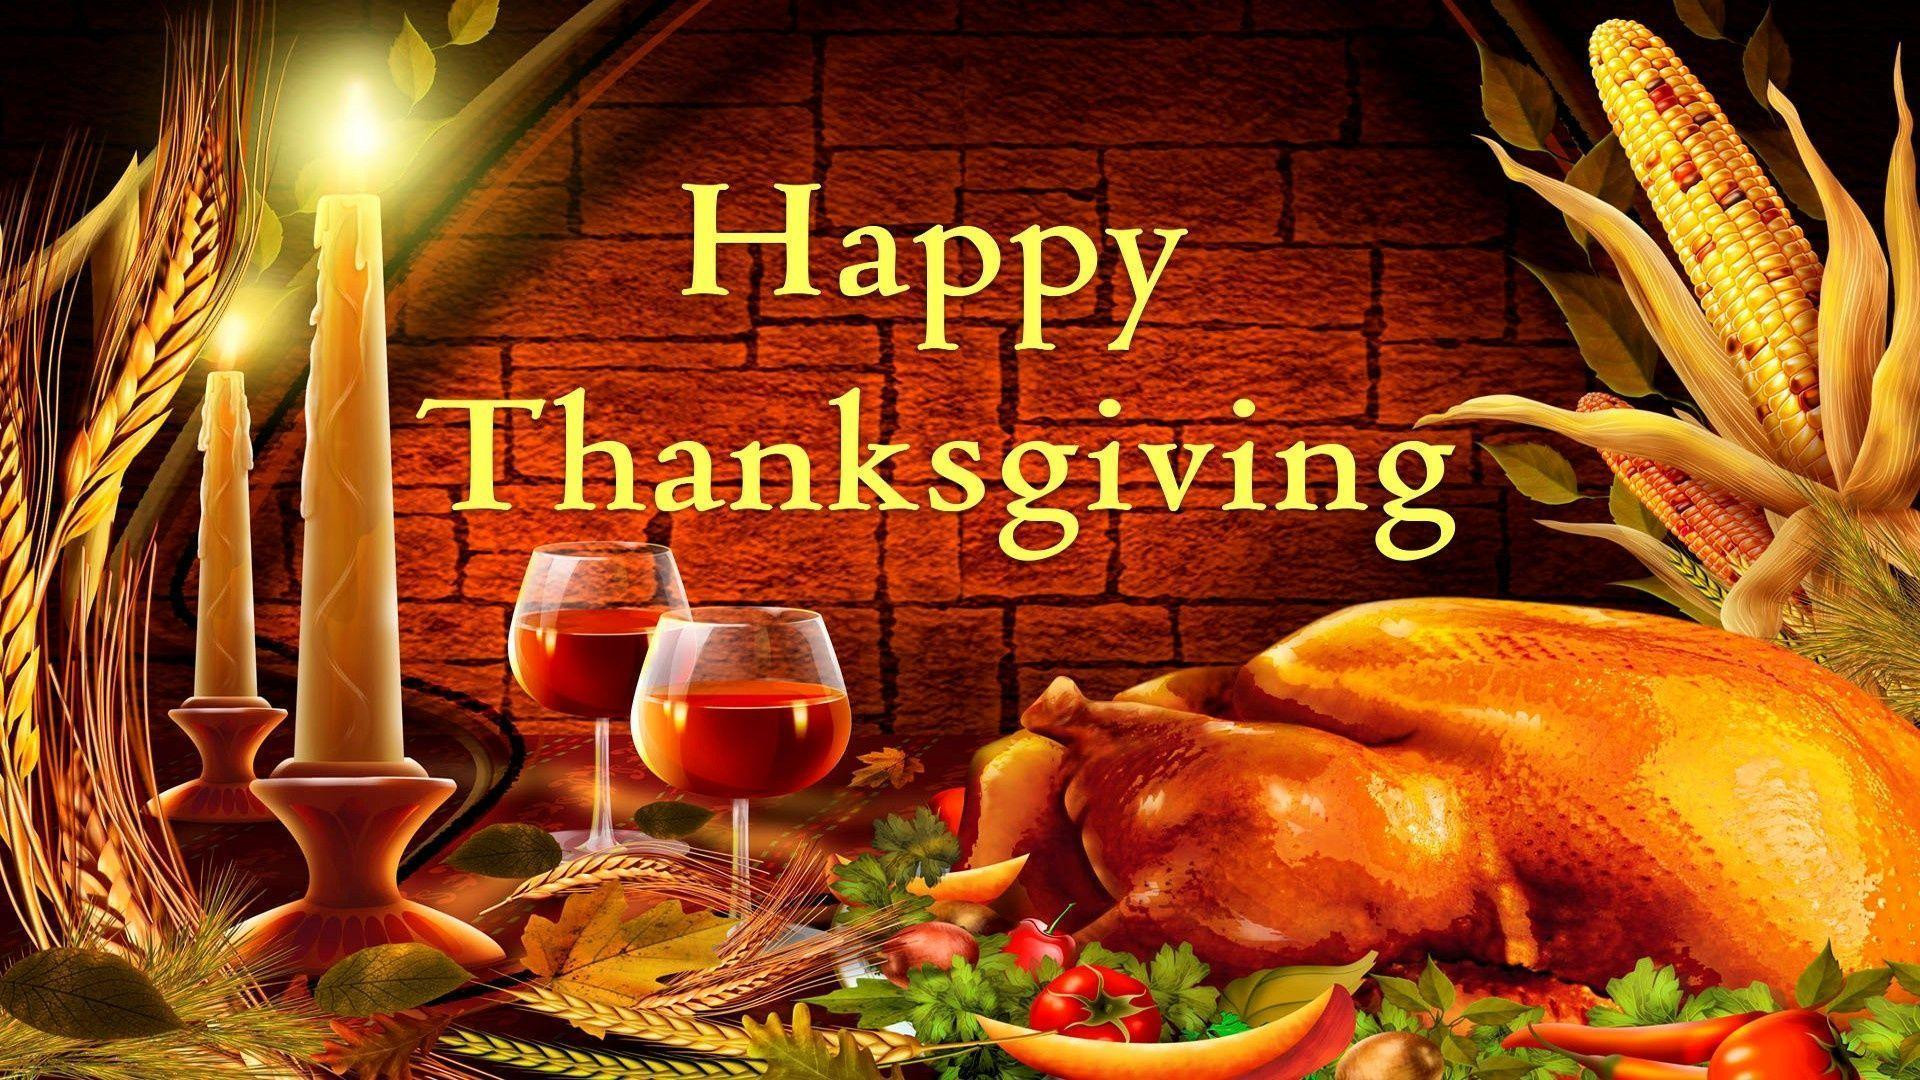 Thanksgiving Quotes Wallpaper
 Free Happy Thanksgiving Wallpapers Wallpaper Cave